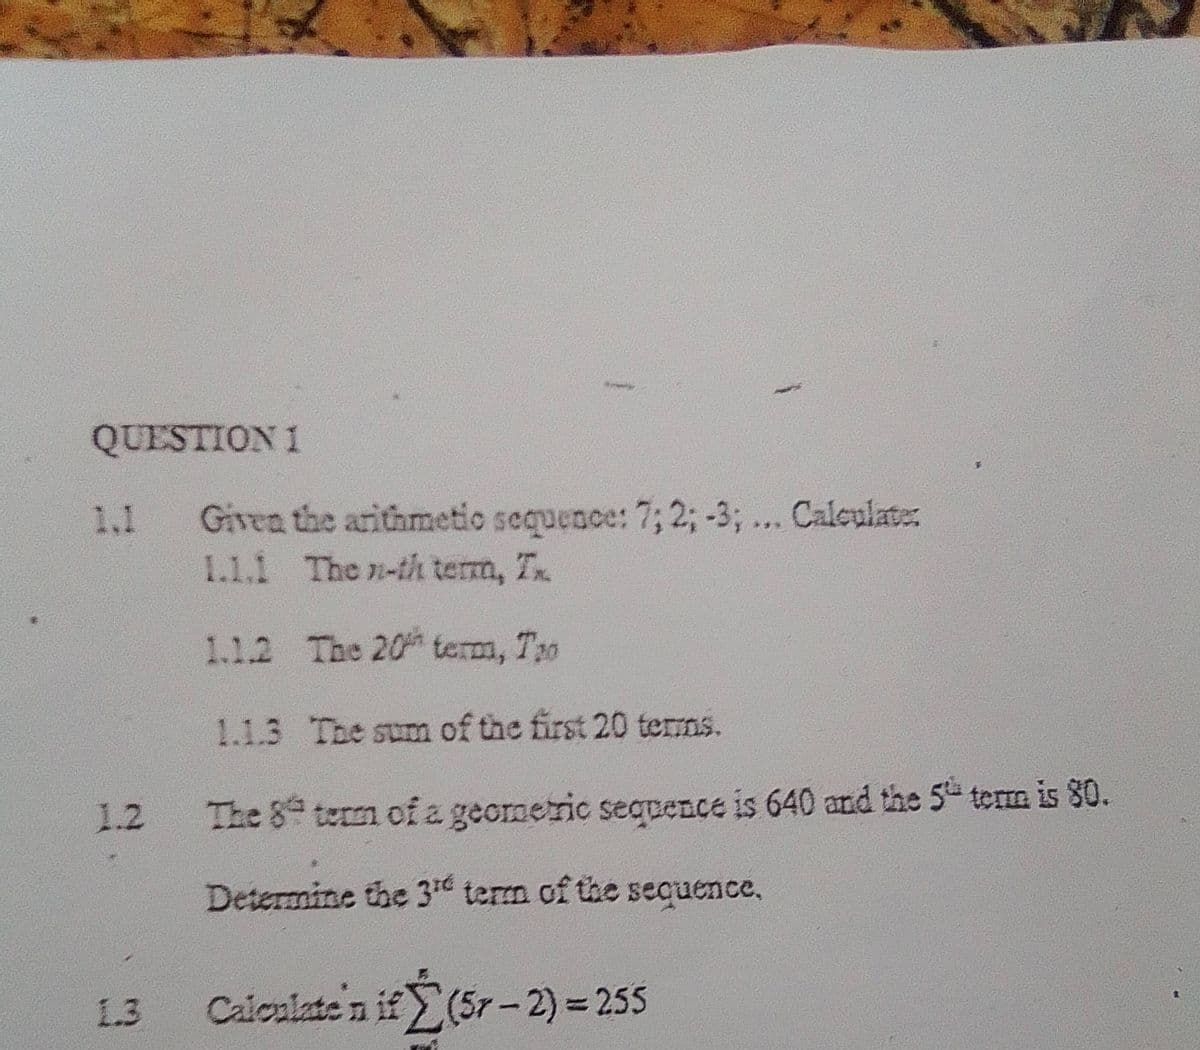 QUESTION 1
1.1
1.2
1.3
Given the arithmetic sequence: 7; 2; -3, ... Calculate:
1.1.1 The n-th terra, Tx.
1.1.2
The 20 term, Tro
The sum of the first 20 terms.
term of a geometric sequence is 640 and the 5th term is 80.
1.1.3
The 8
Determine the 3¹ term of the sequence,
Calculate'n if(5r-2) = 255